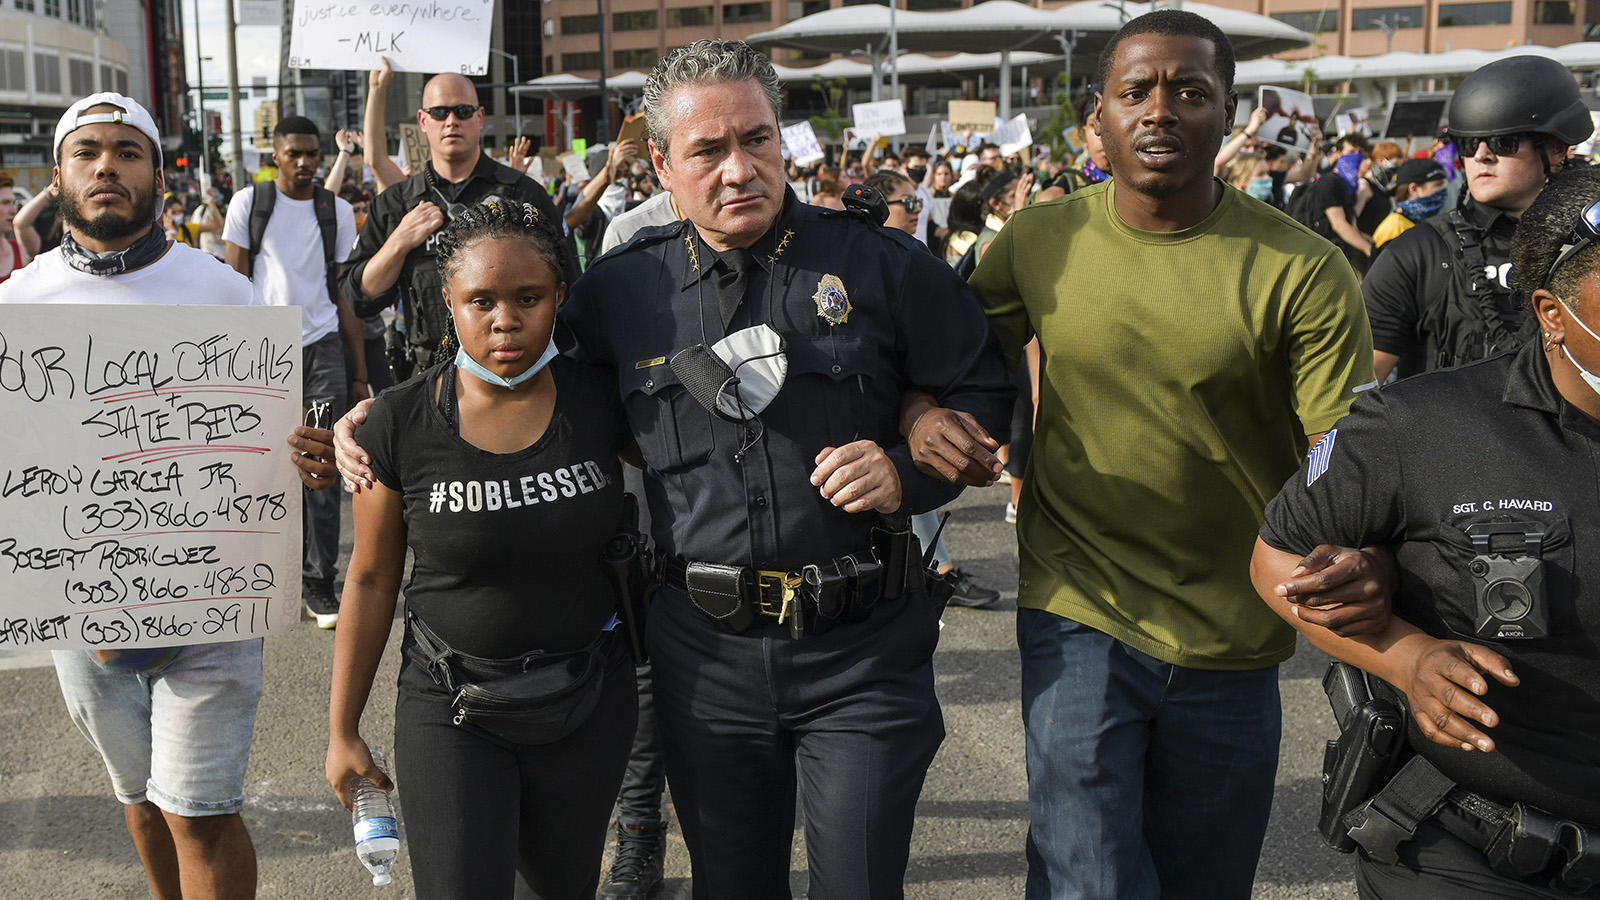 Denver Police Chief Paul Pazen embraces a woman during a march to protest the death of George Floyd on June 1, 2020 in Denver.